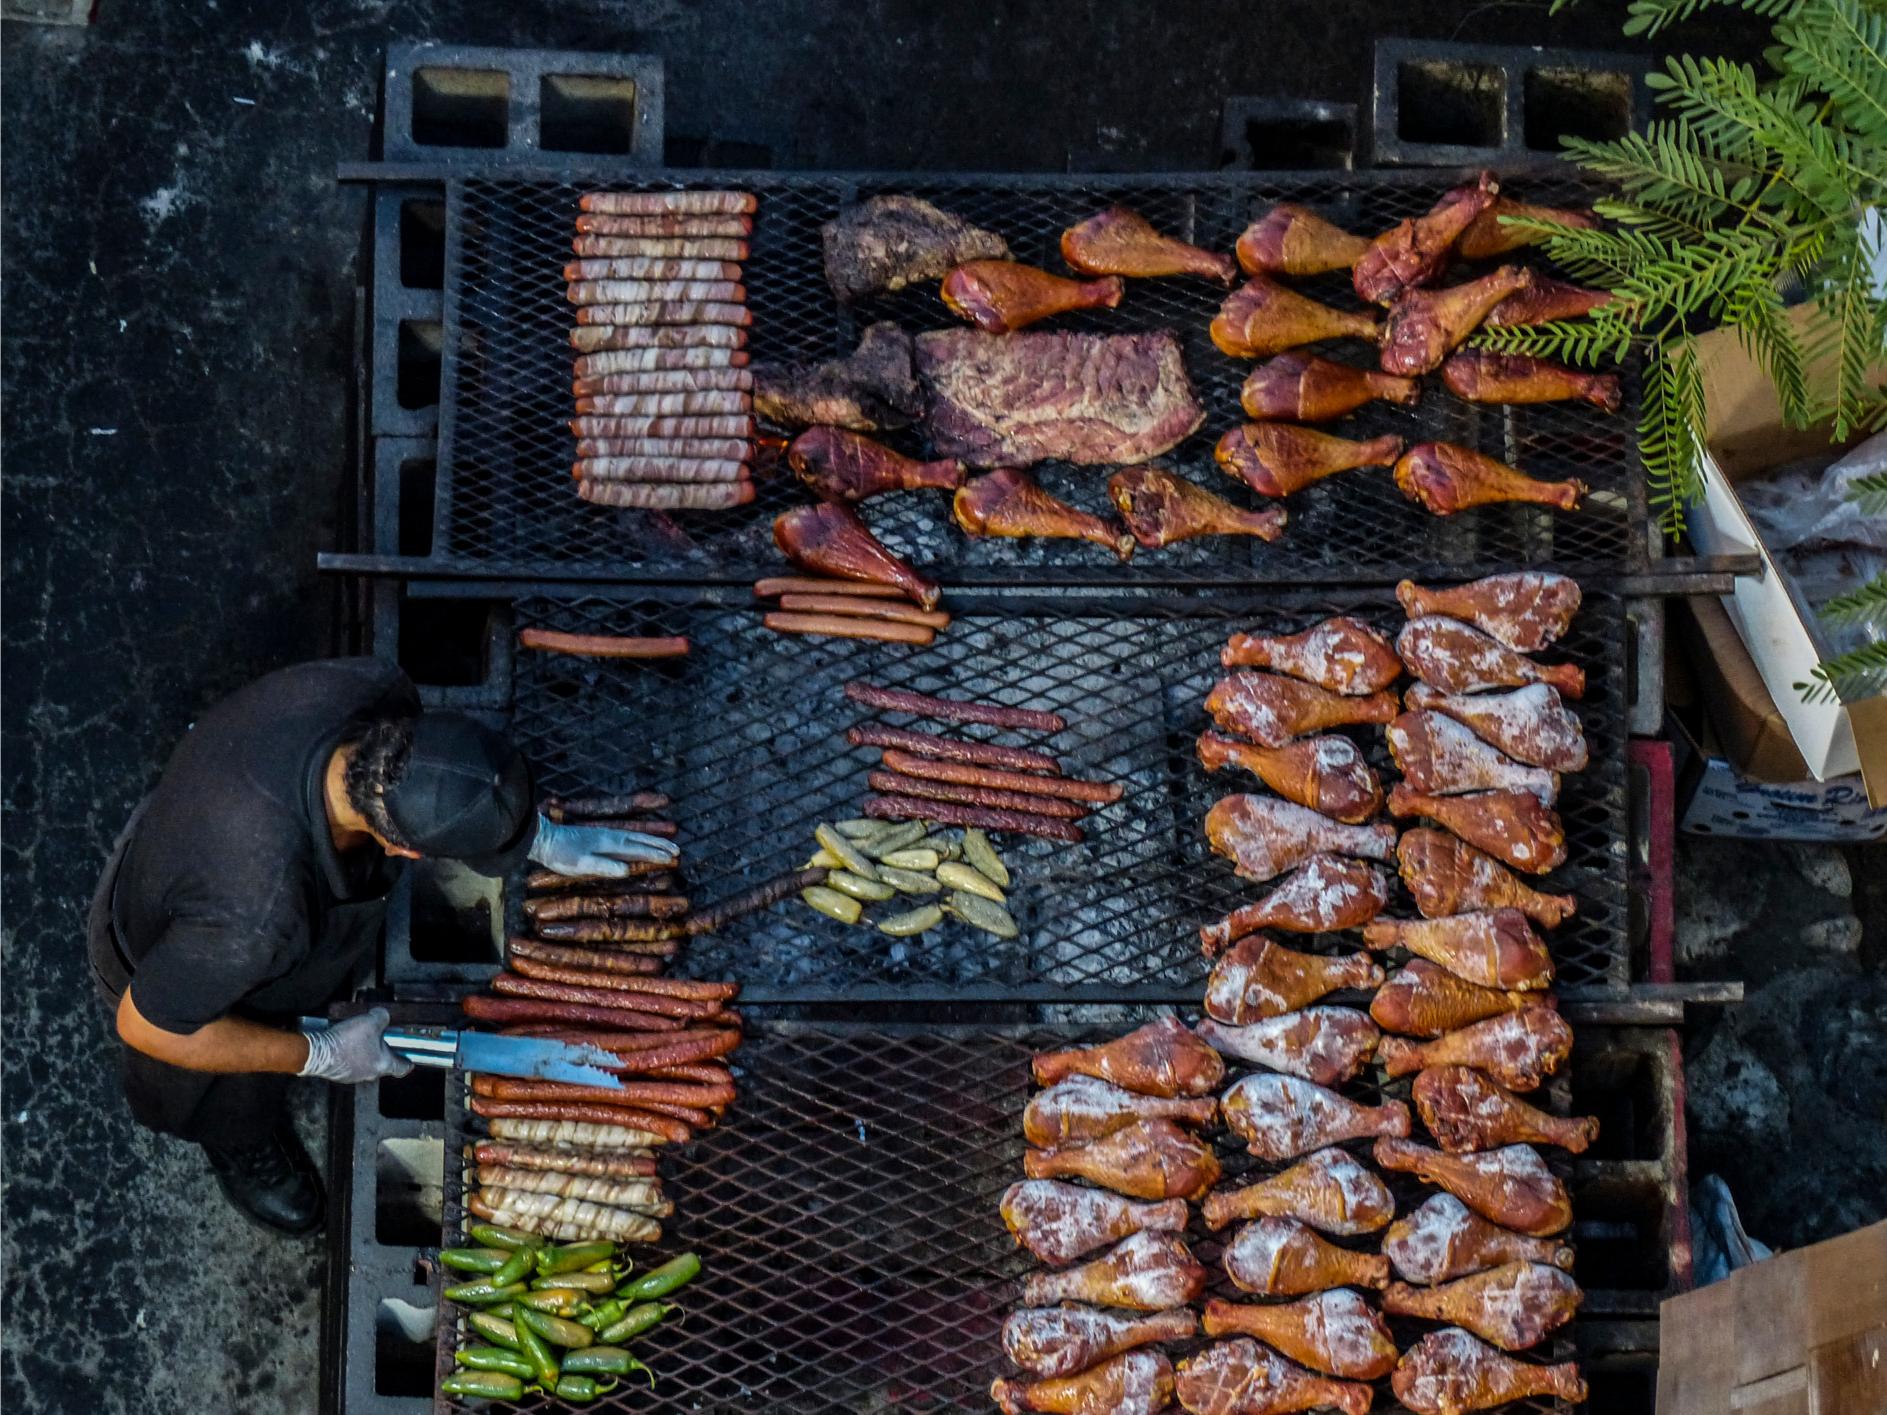 BBQ catering options offered by Randy peters